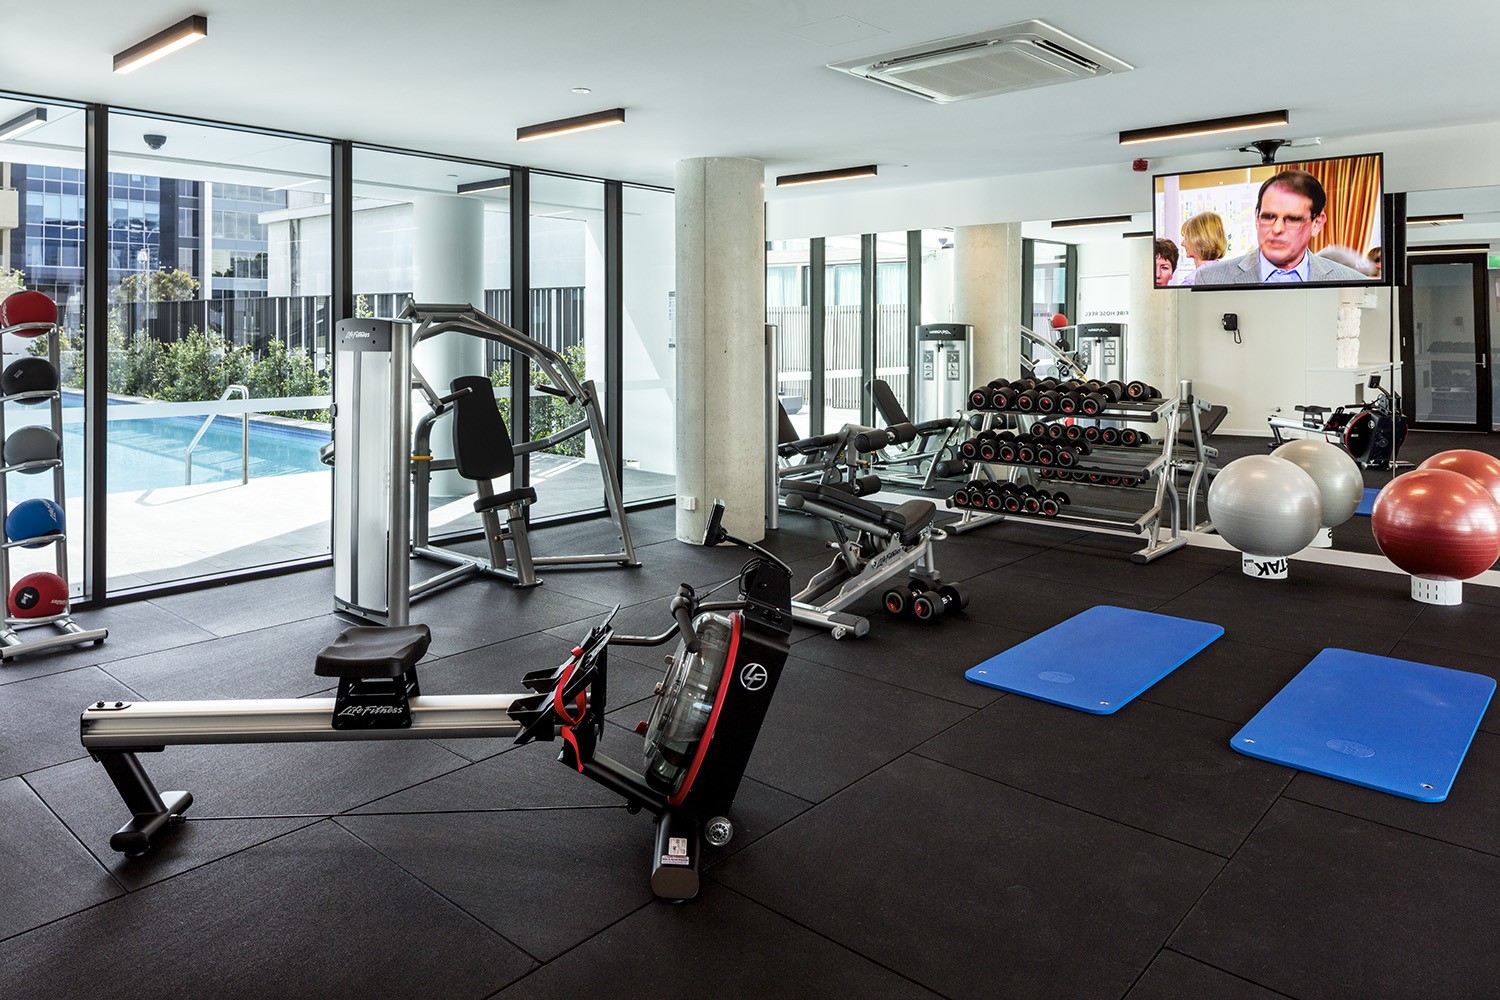 Gym with fitness machines and weights looking out over pool area